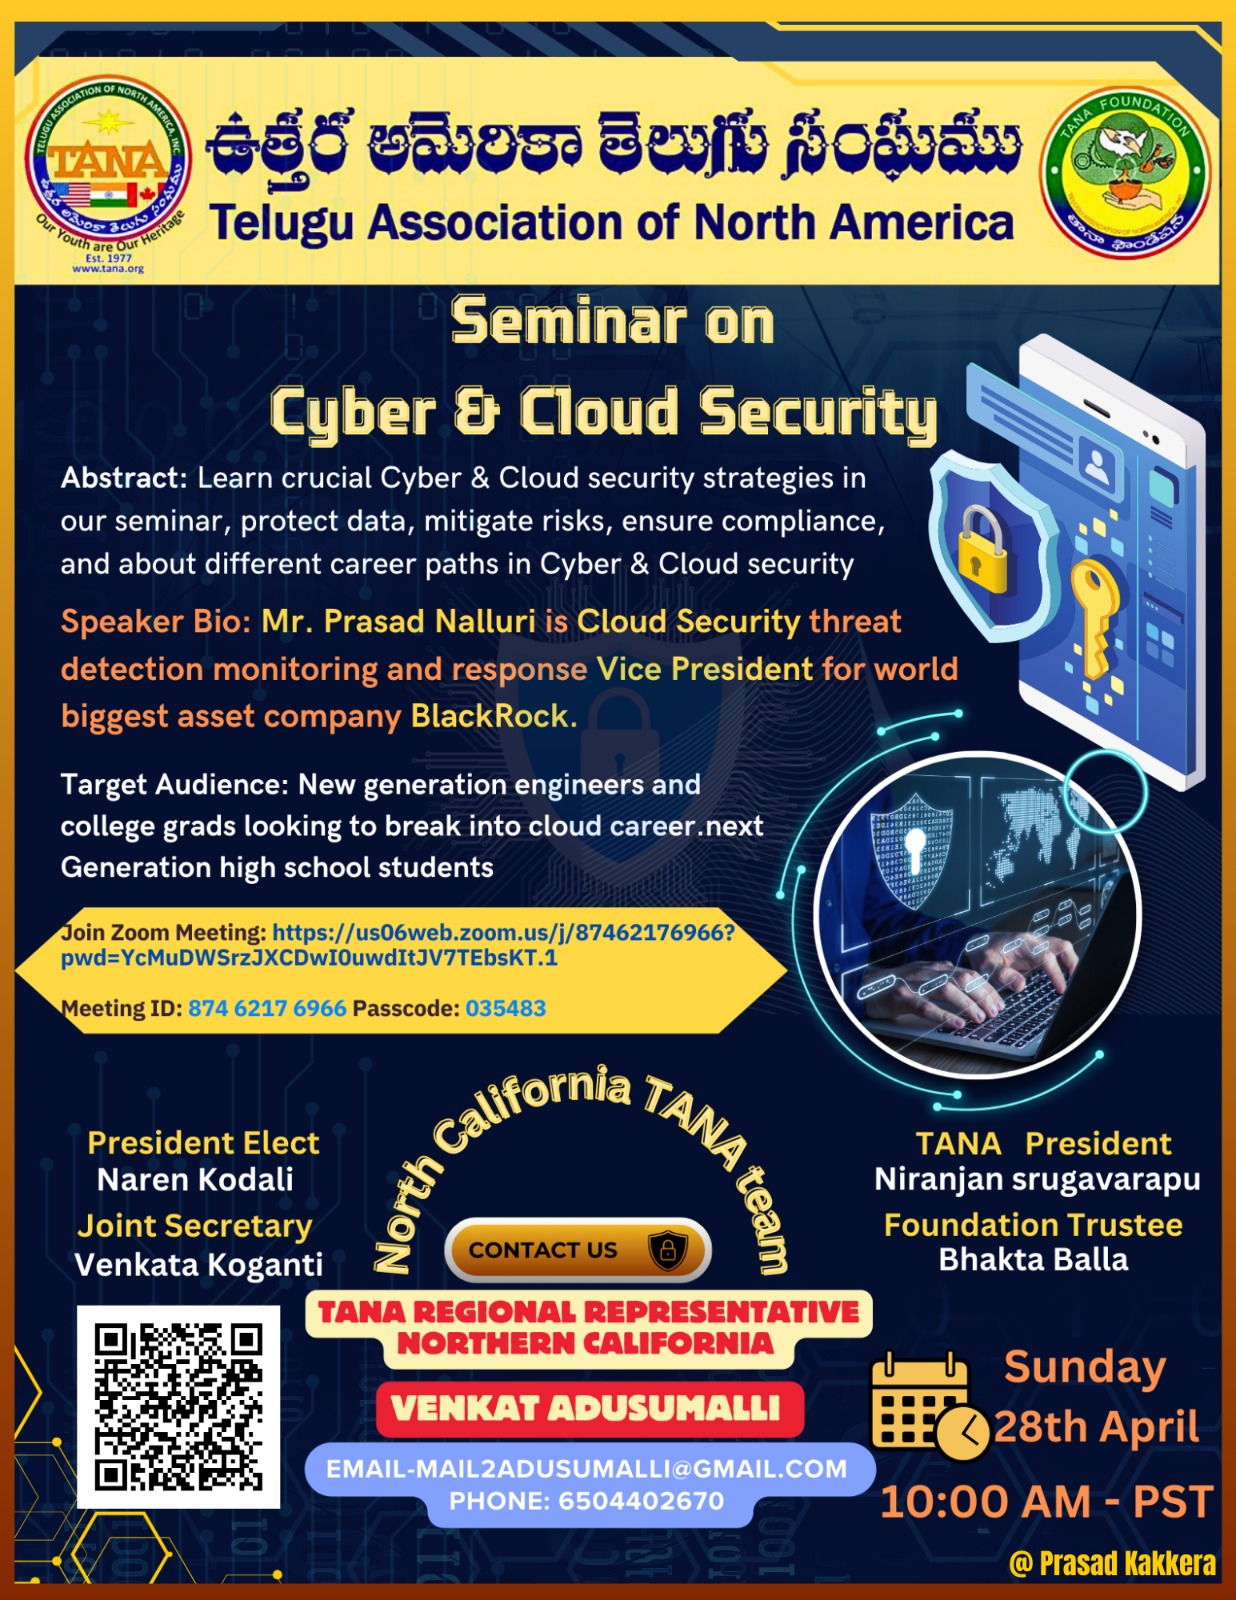 TANA Seminar on Cyber Security and Cloud Security